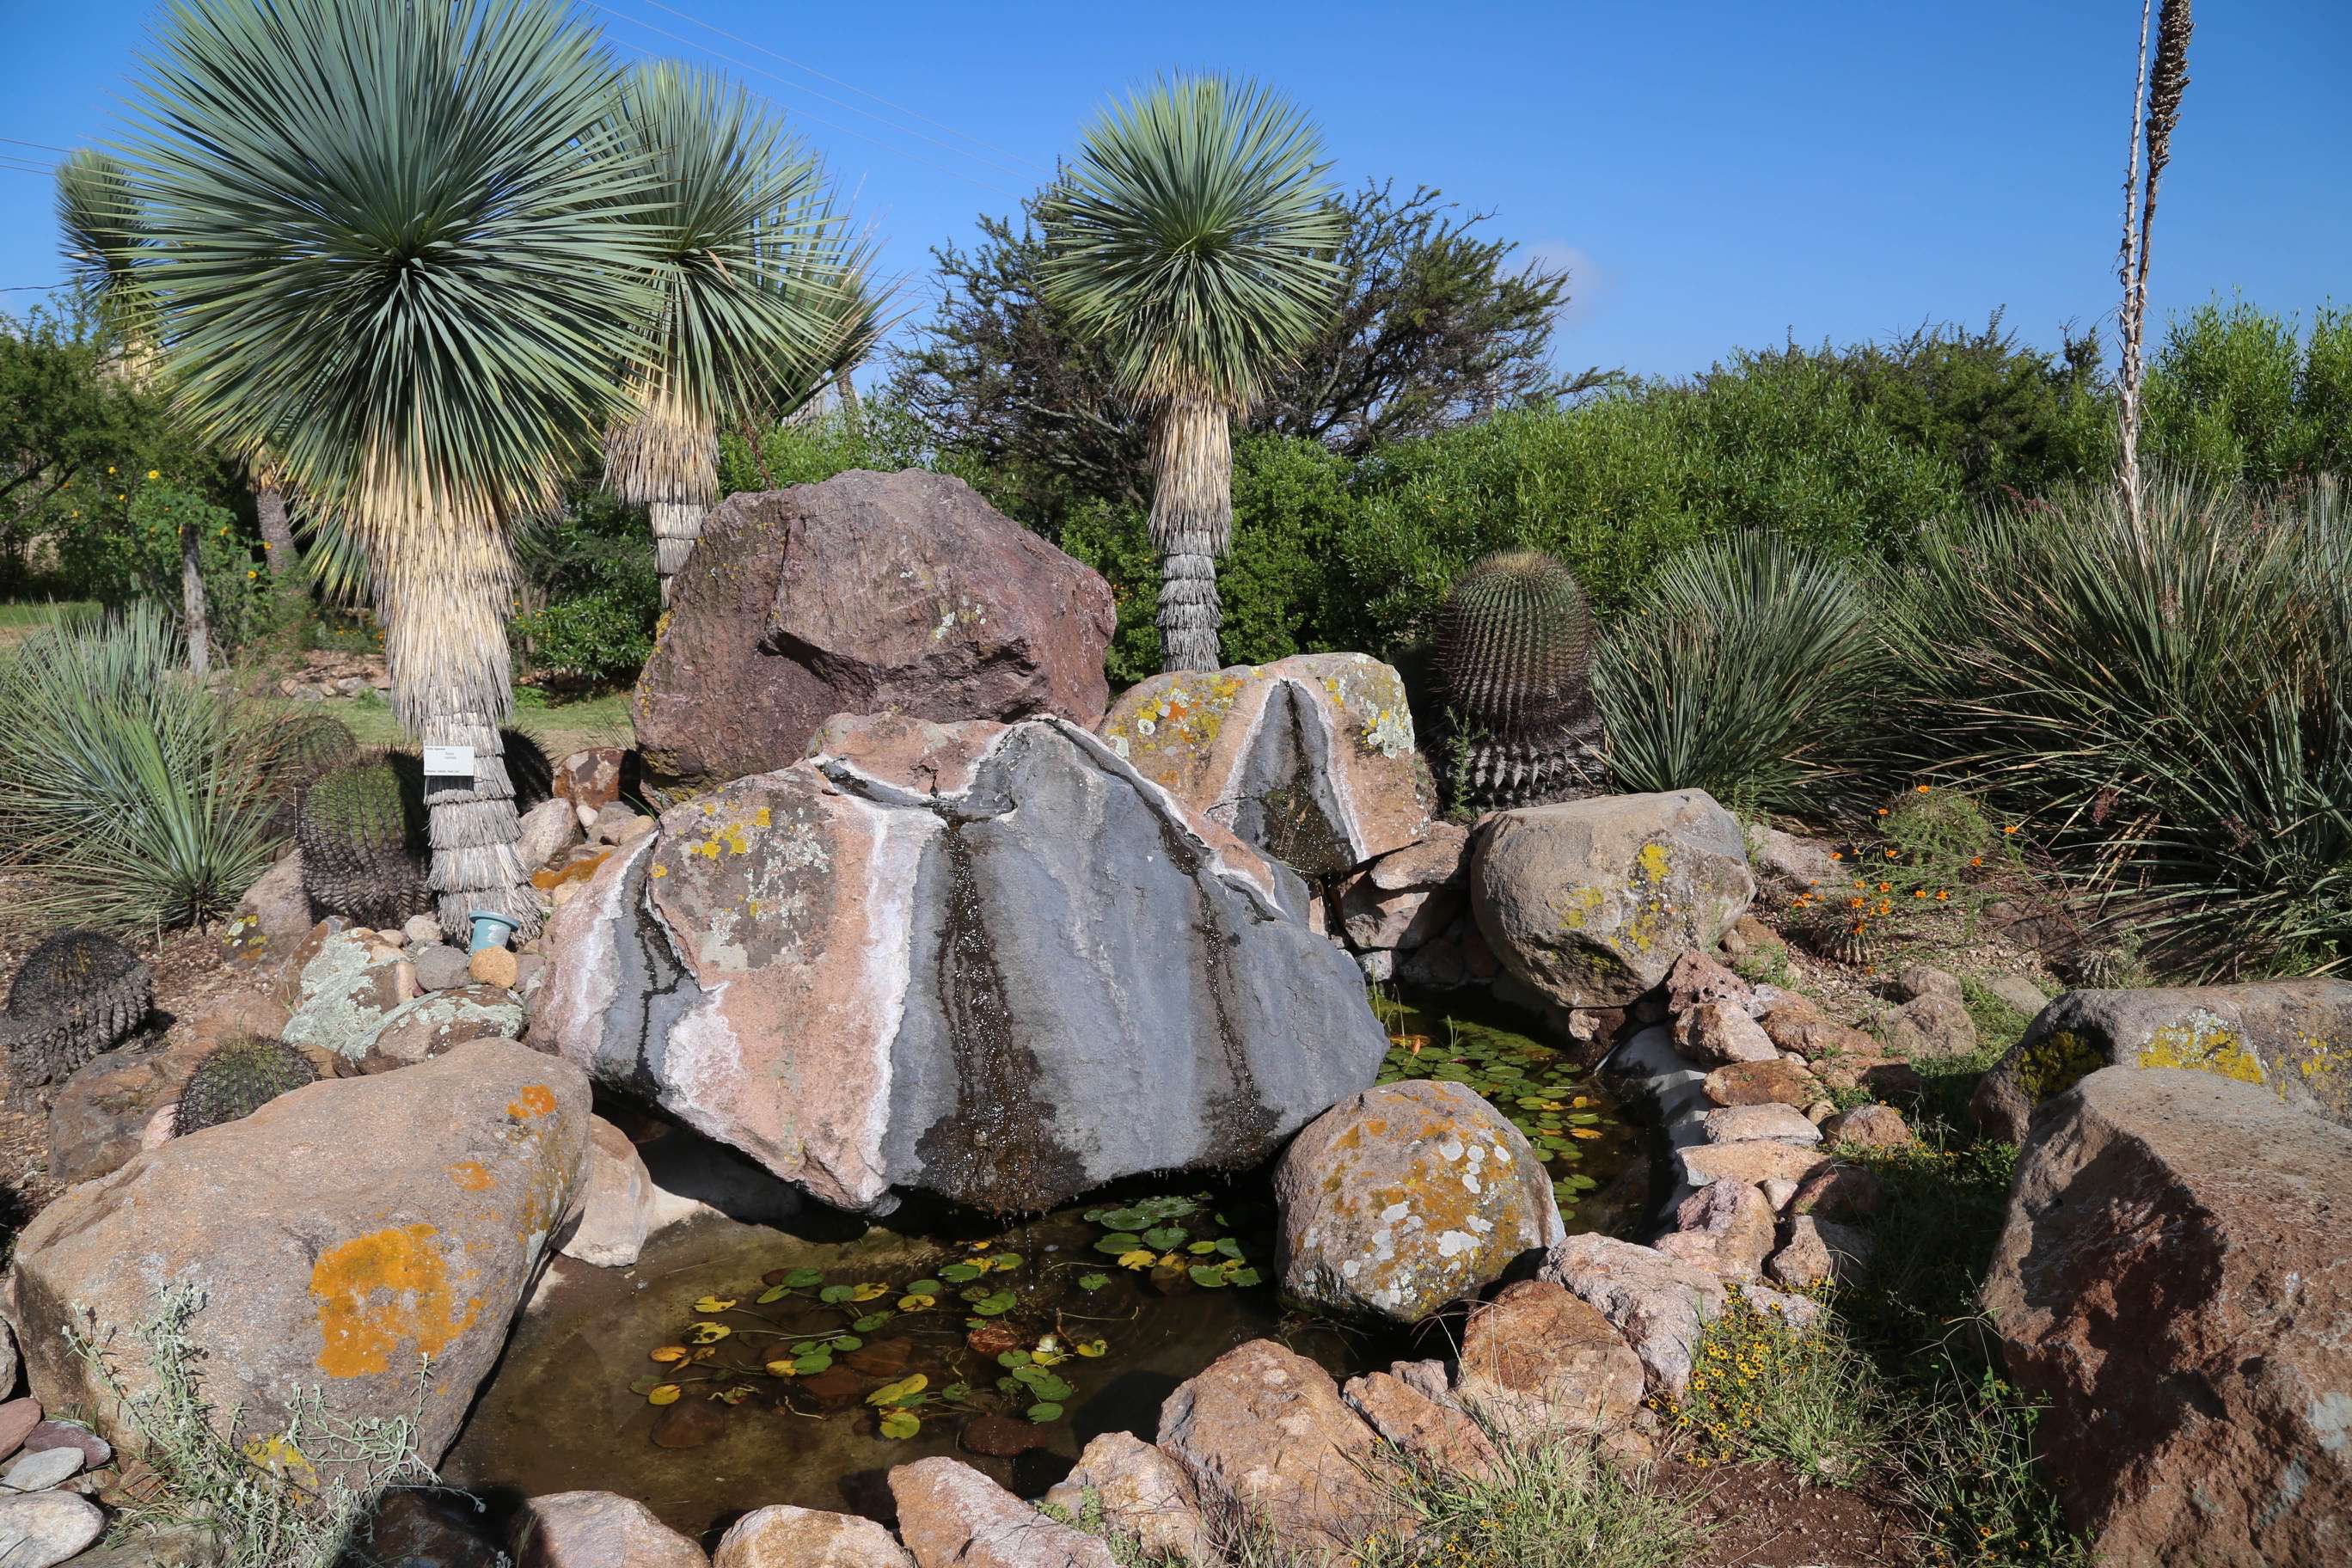 El Charco de Ingenio does an excellent job of showcasing Mexico's rich flora. This water feature is at the beginning of the guided tour.